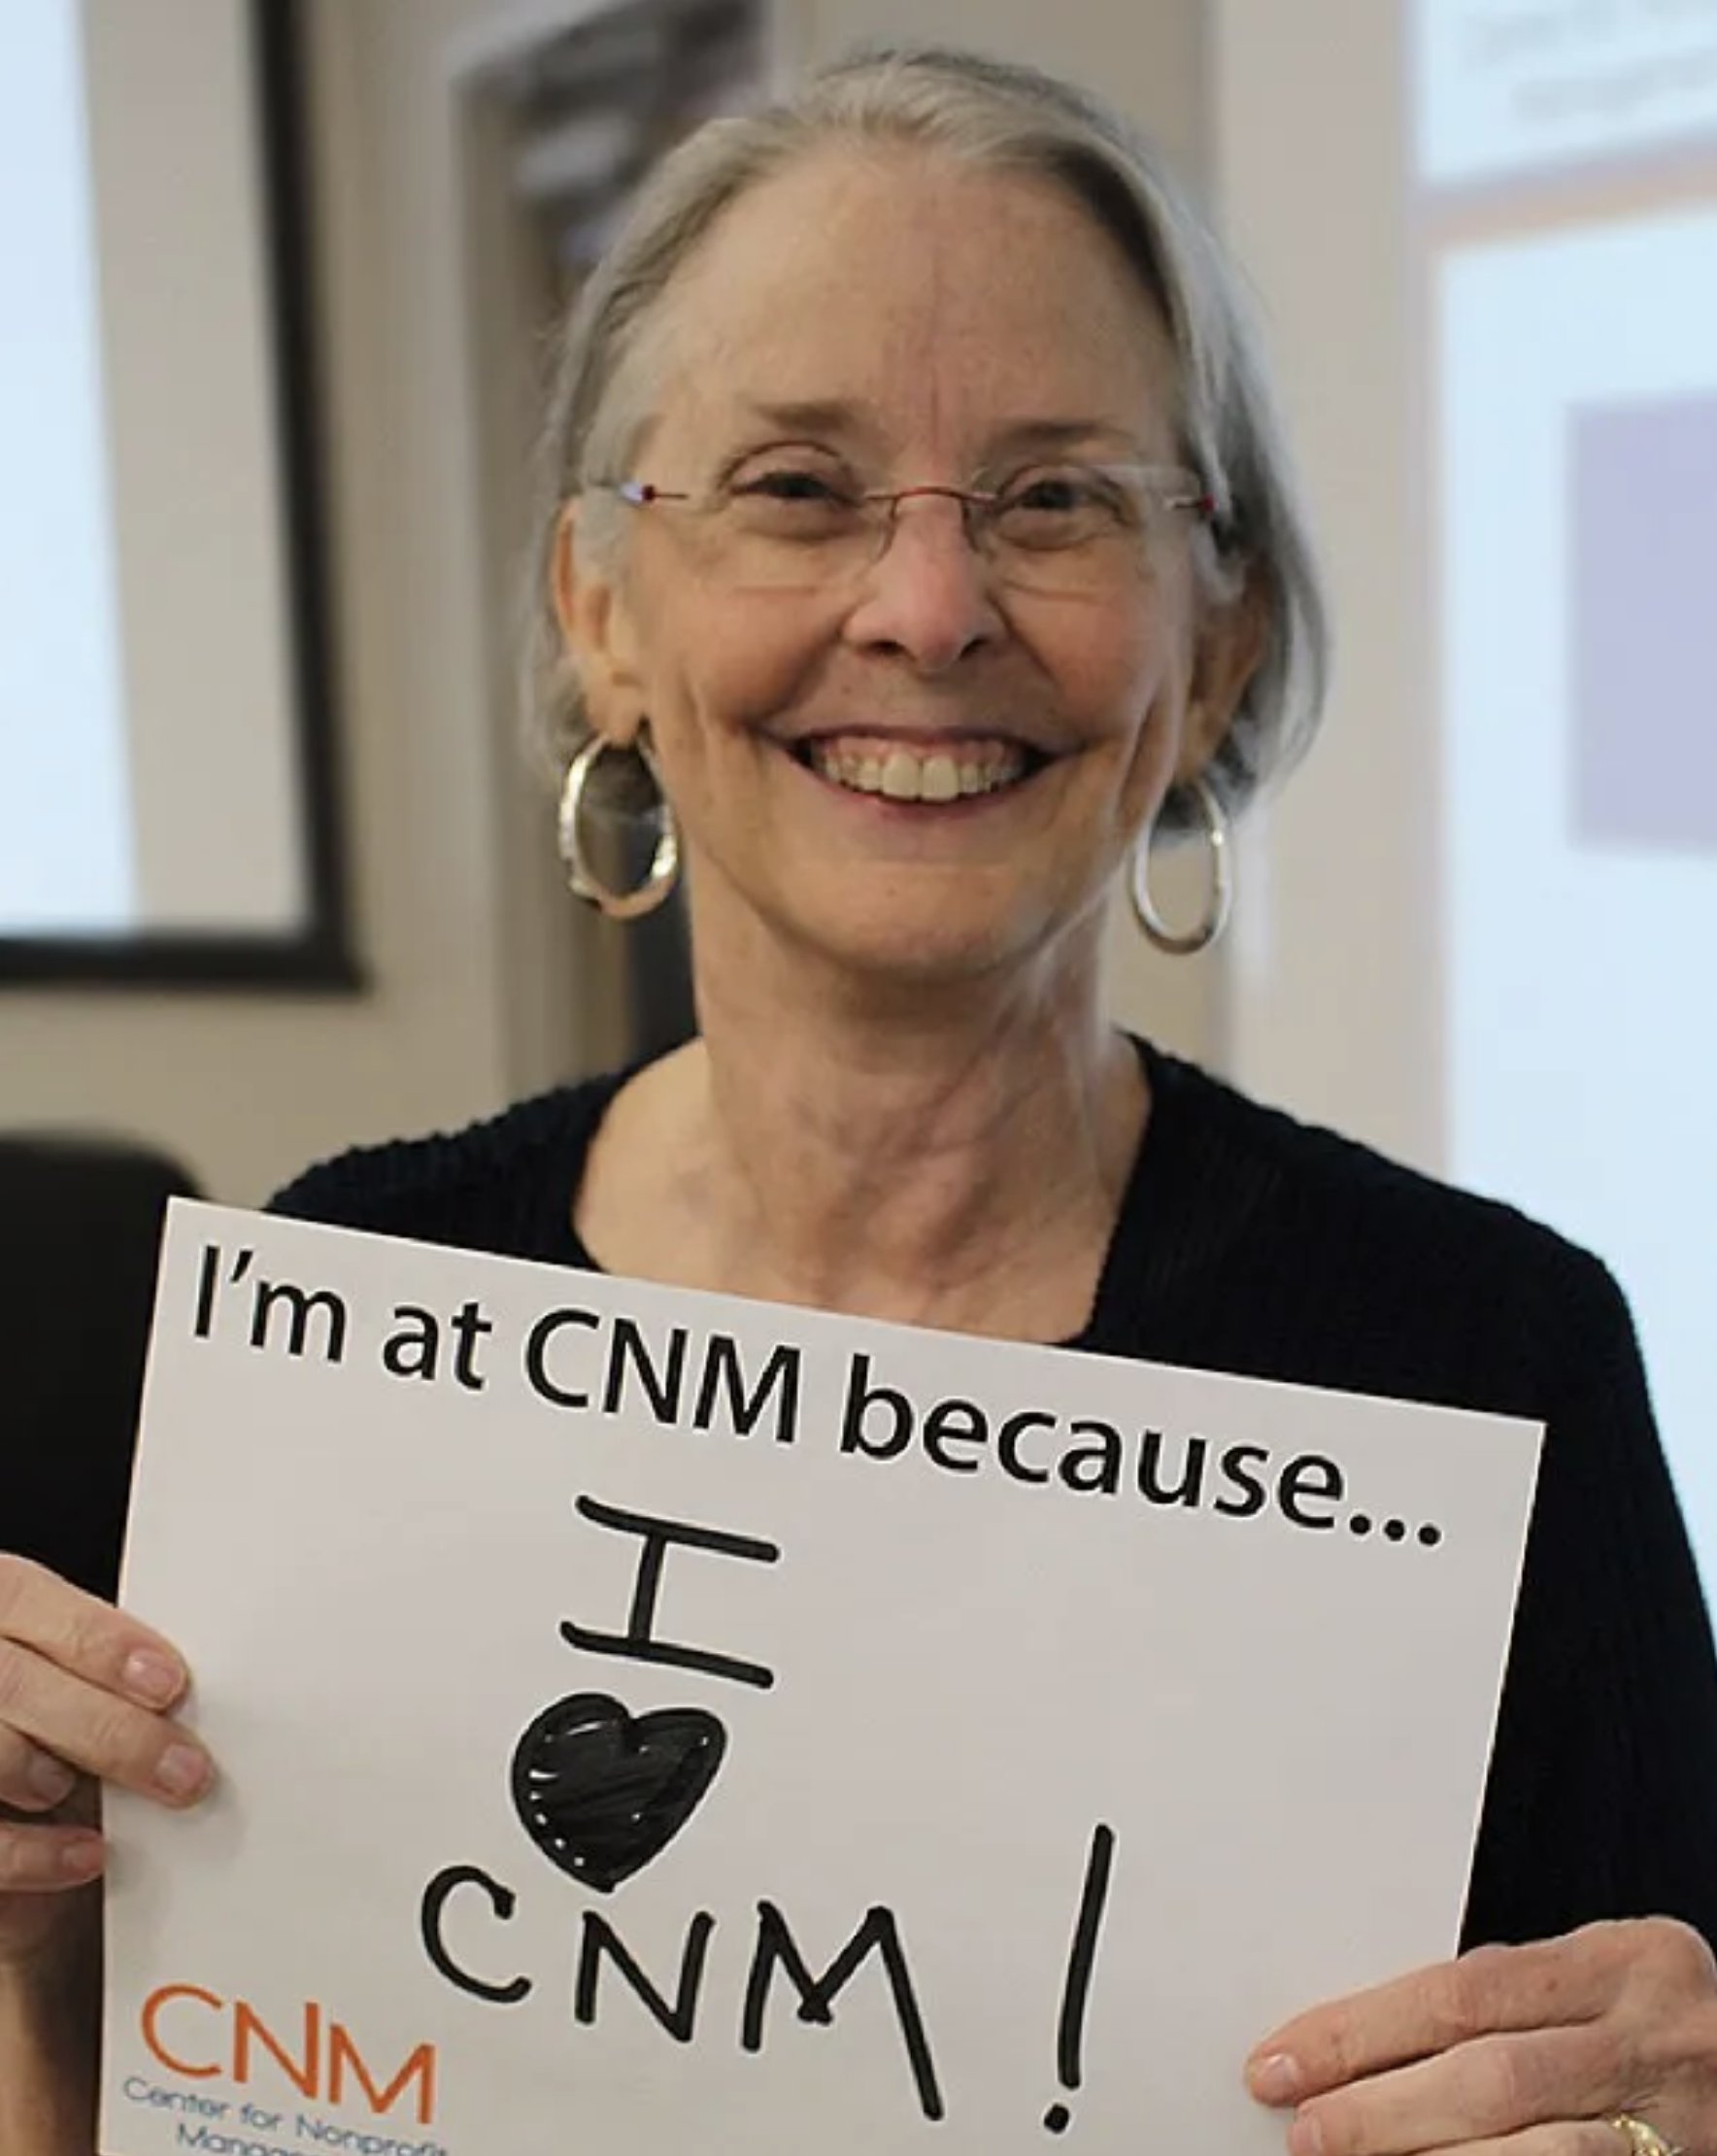 Nonprofit employee smiling and holding a sign " I'm at CNM because I love CNM"